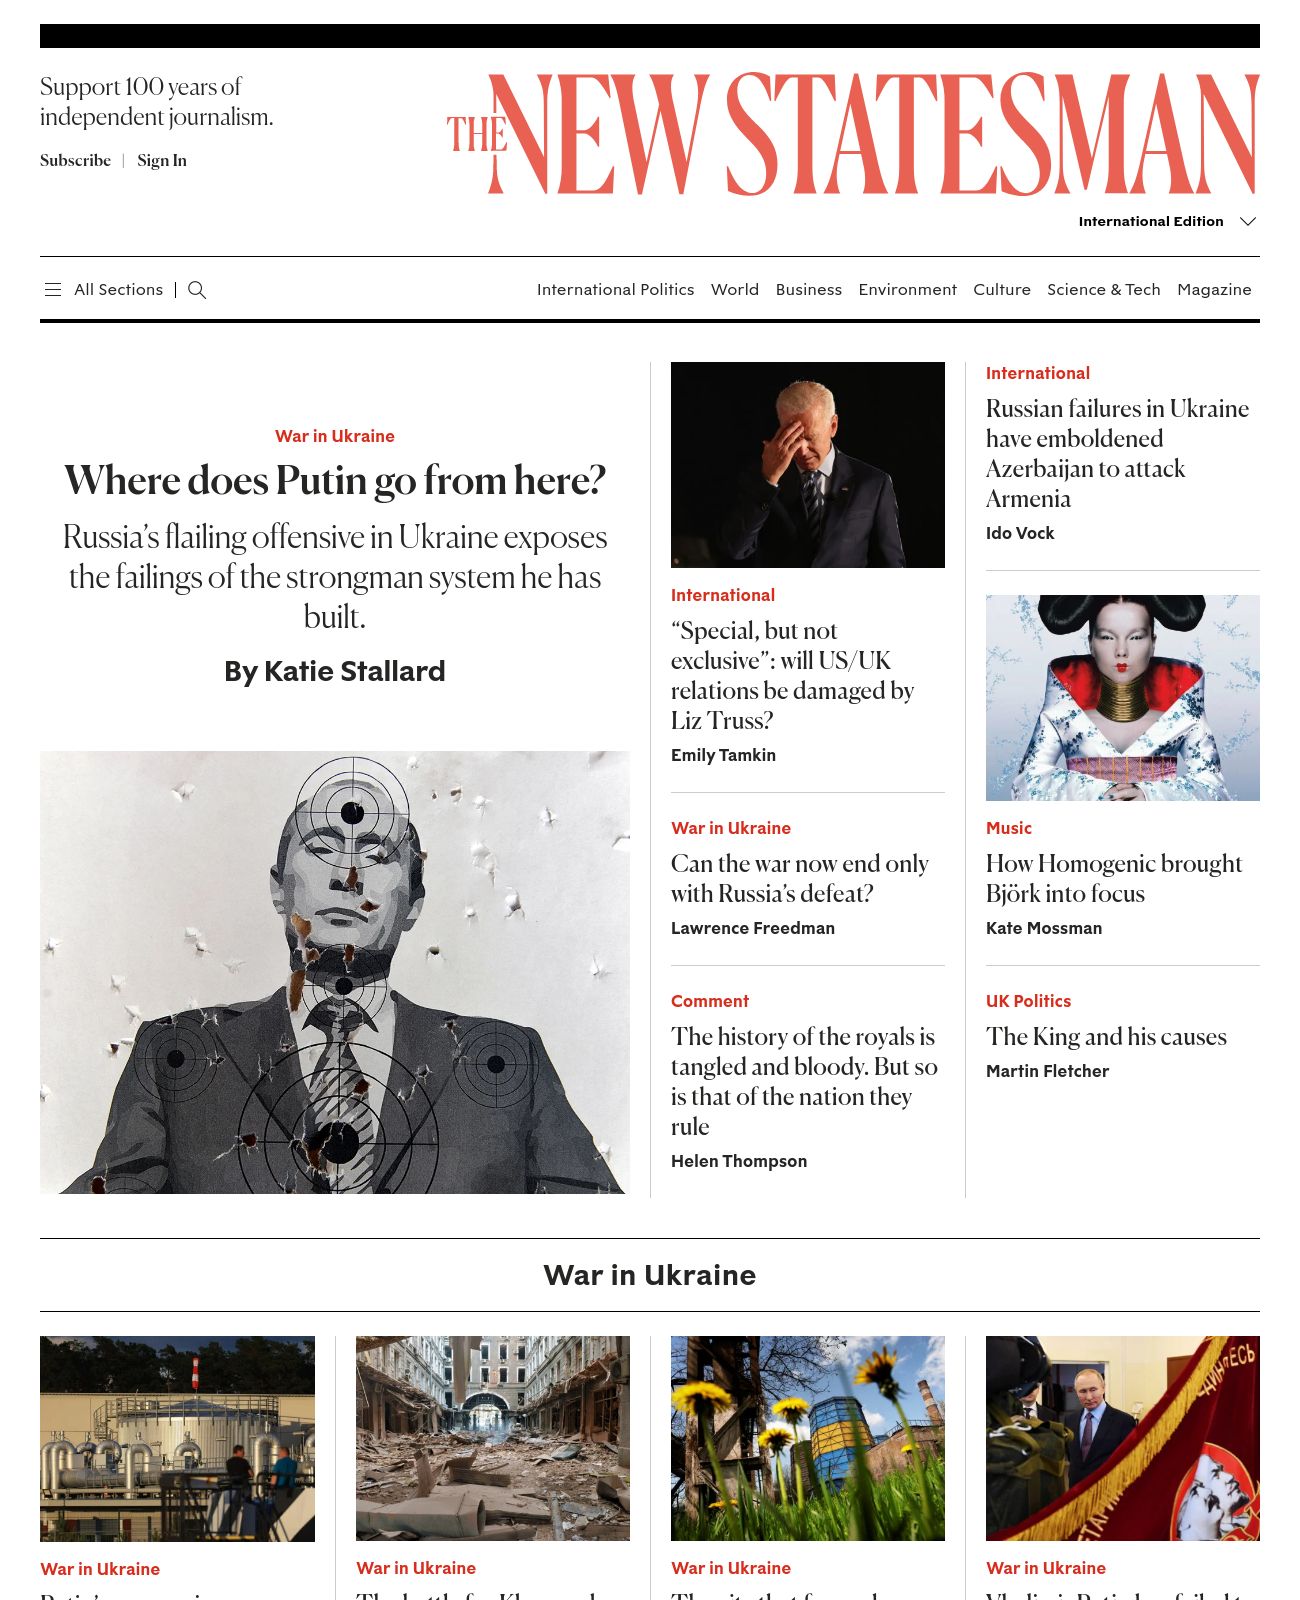 New Statesman at 2022-09-17 14:00:41+01:00 local time